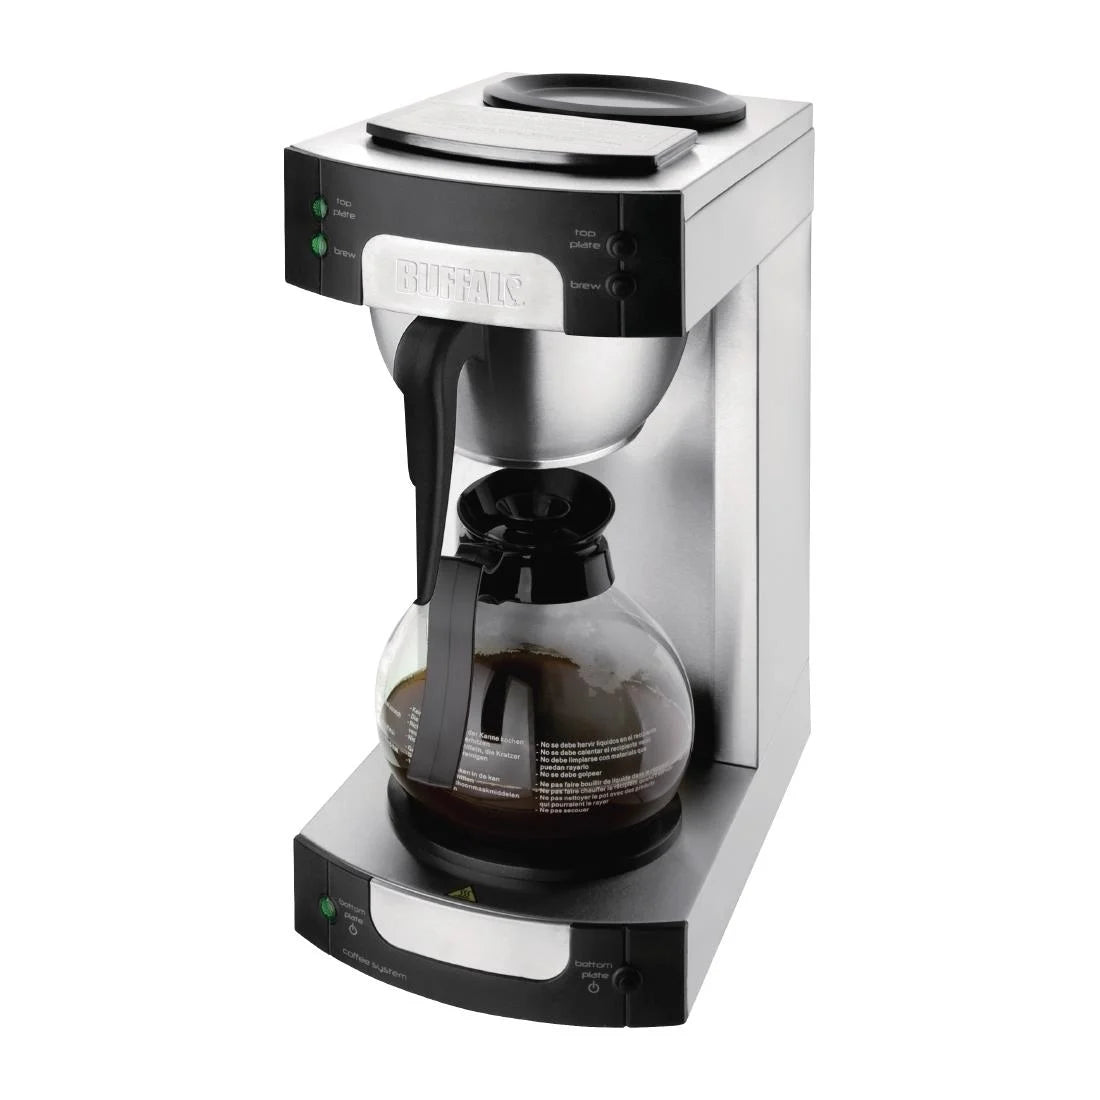 Buffalo Filter Coffee Maker.Product Ref:00563.MODEL:CW305.🚚 3-5 Days Delivery